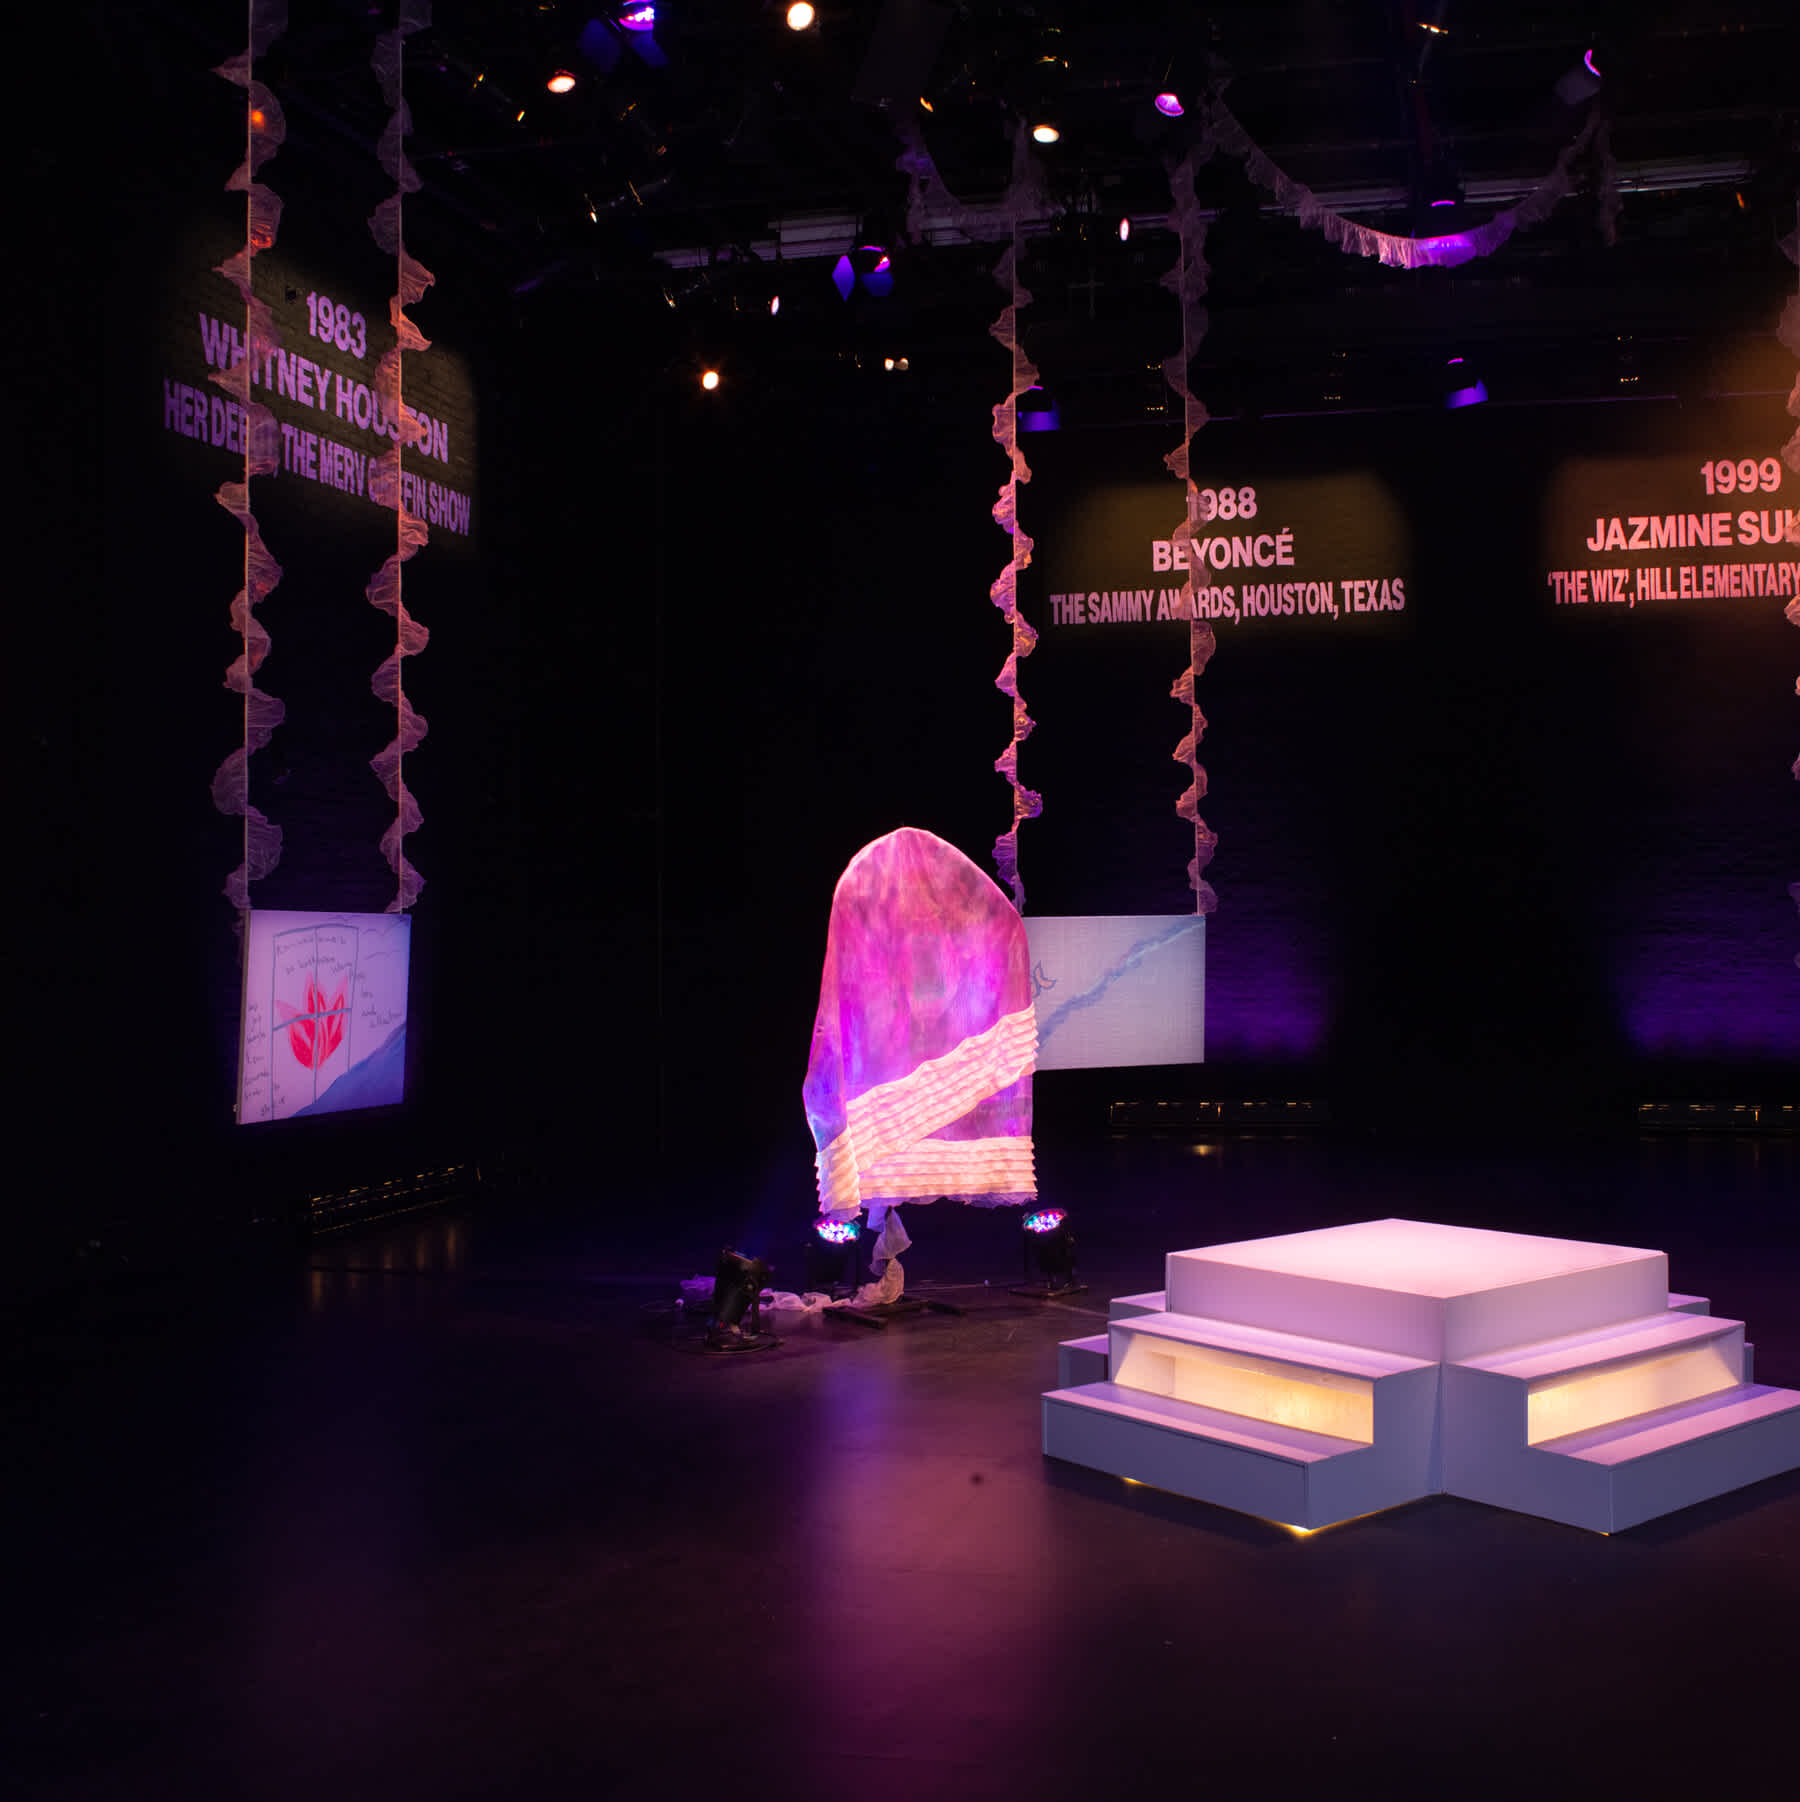 Illuminated periwinkle stage surrounded by three hanging digital drawings with light pink ruffles, a glowing bag sculpture and hand-painted text on the wall that reads left to right “1978 Diana Ross, ‘The Wiz,’ Motown Film, "1983 Whitney Houston, Her Debut, The Merv Griffin Show," "1988 Beyonce, The Sammy Awards, Texas," and "1999 Jazmine Sullivan, 'The Wiz,' Hill Elementary, Philadelphia."